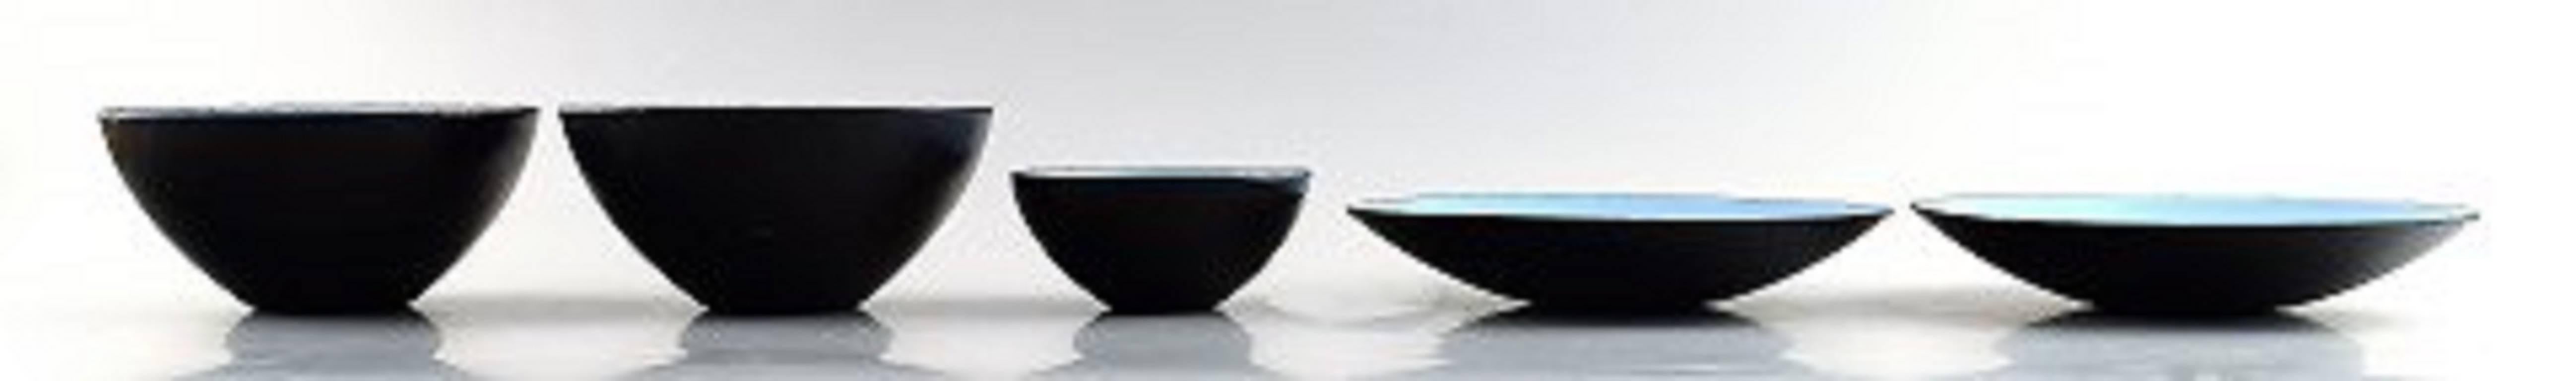 Krenit 3 bowls and two dishes by Herbert Krenchel.

Black metal and turquoise enamel.

1970s. Danish design.

The largest dish measures 12.5 cm. in diameter. 6.5 cm. high. 

In very good condition.

Hallmarked. Krenit, Denmark.